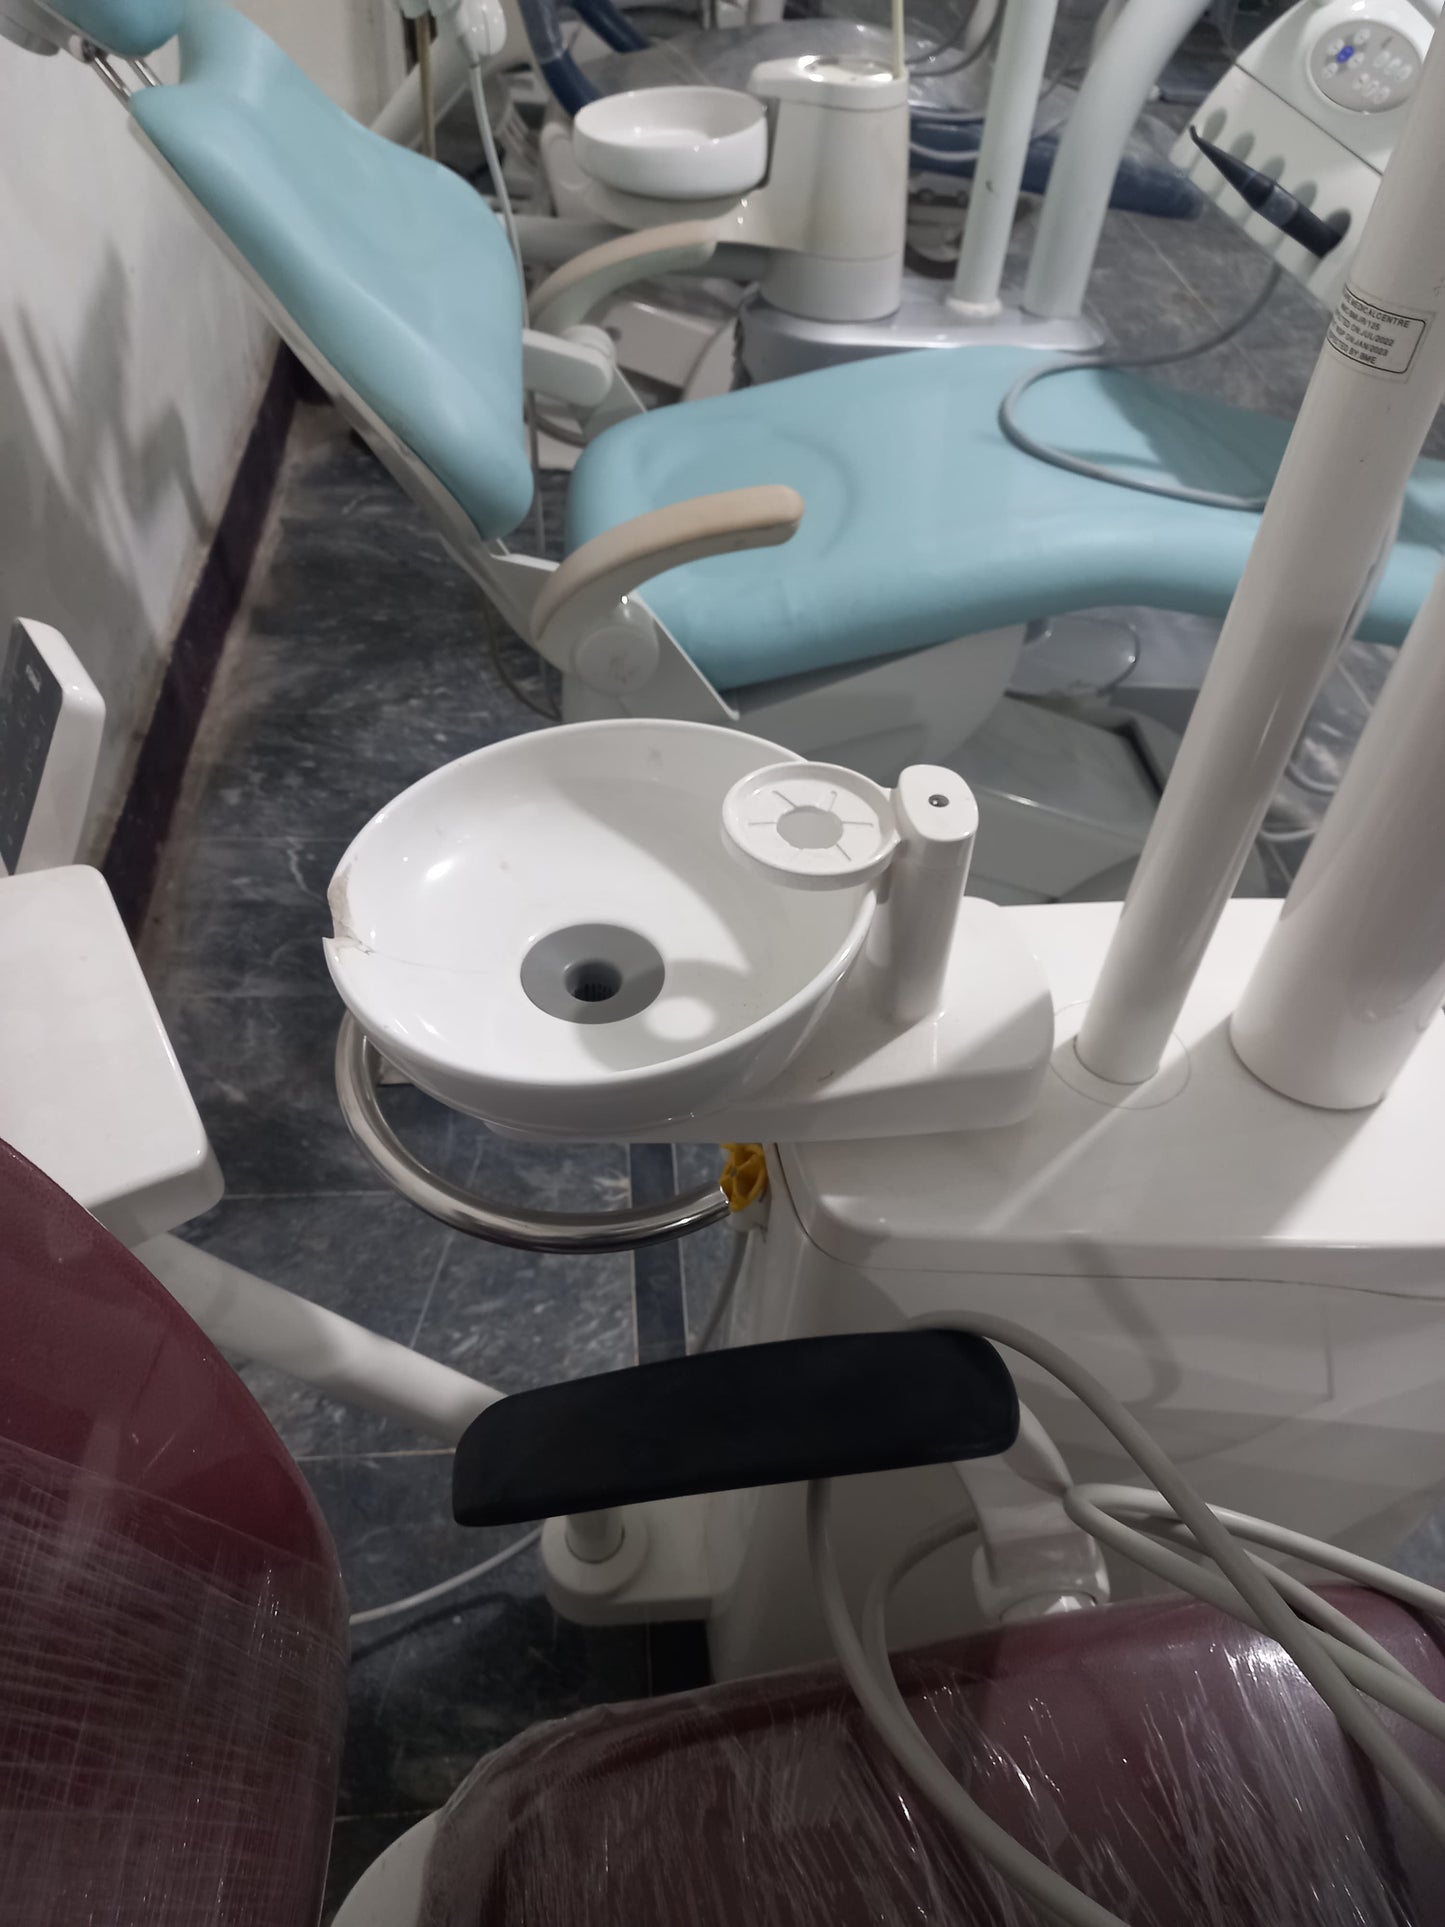 Fona Dental Chair/Unit Made in Italy (Original Condition)